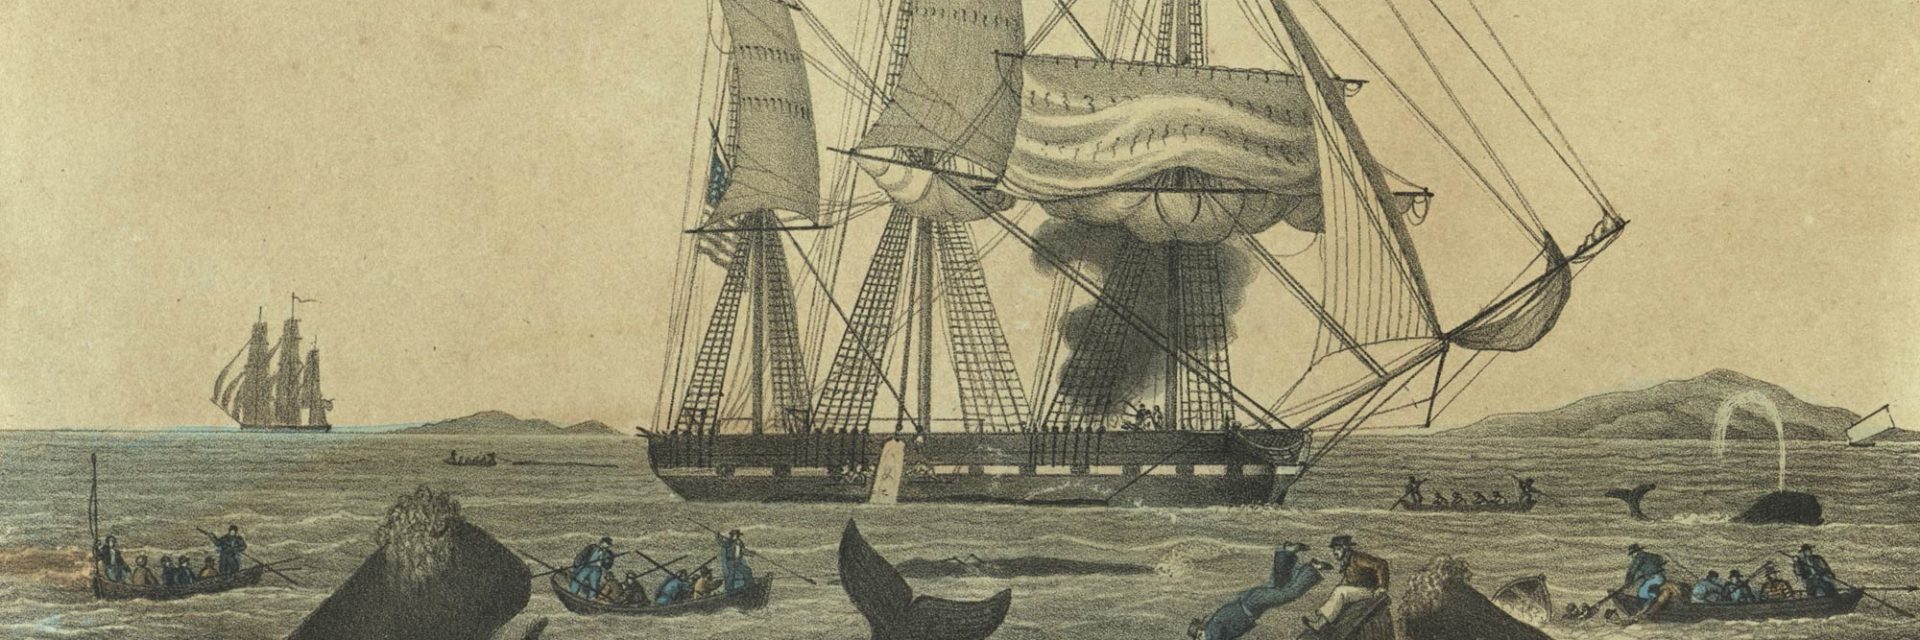 a lithographic print of a whale ship and whaleboats attempting to capture whales - some are being destroyed by the whales